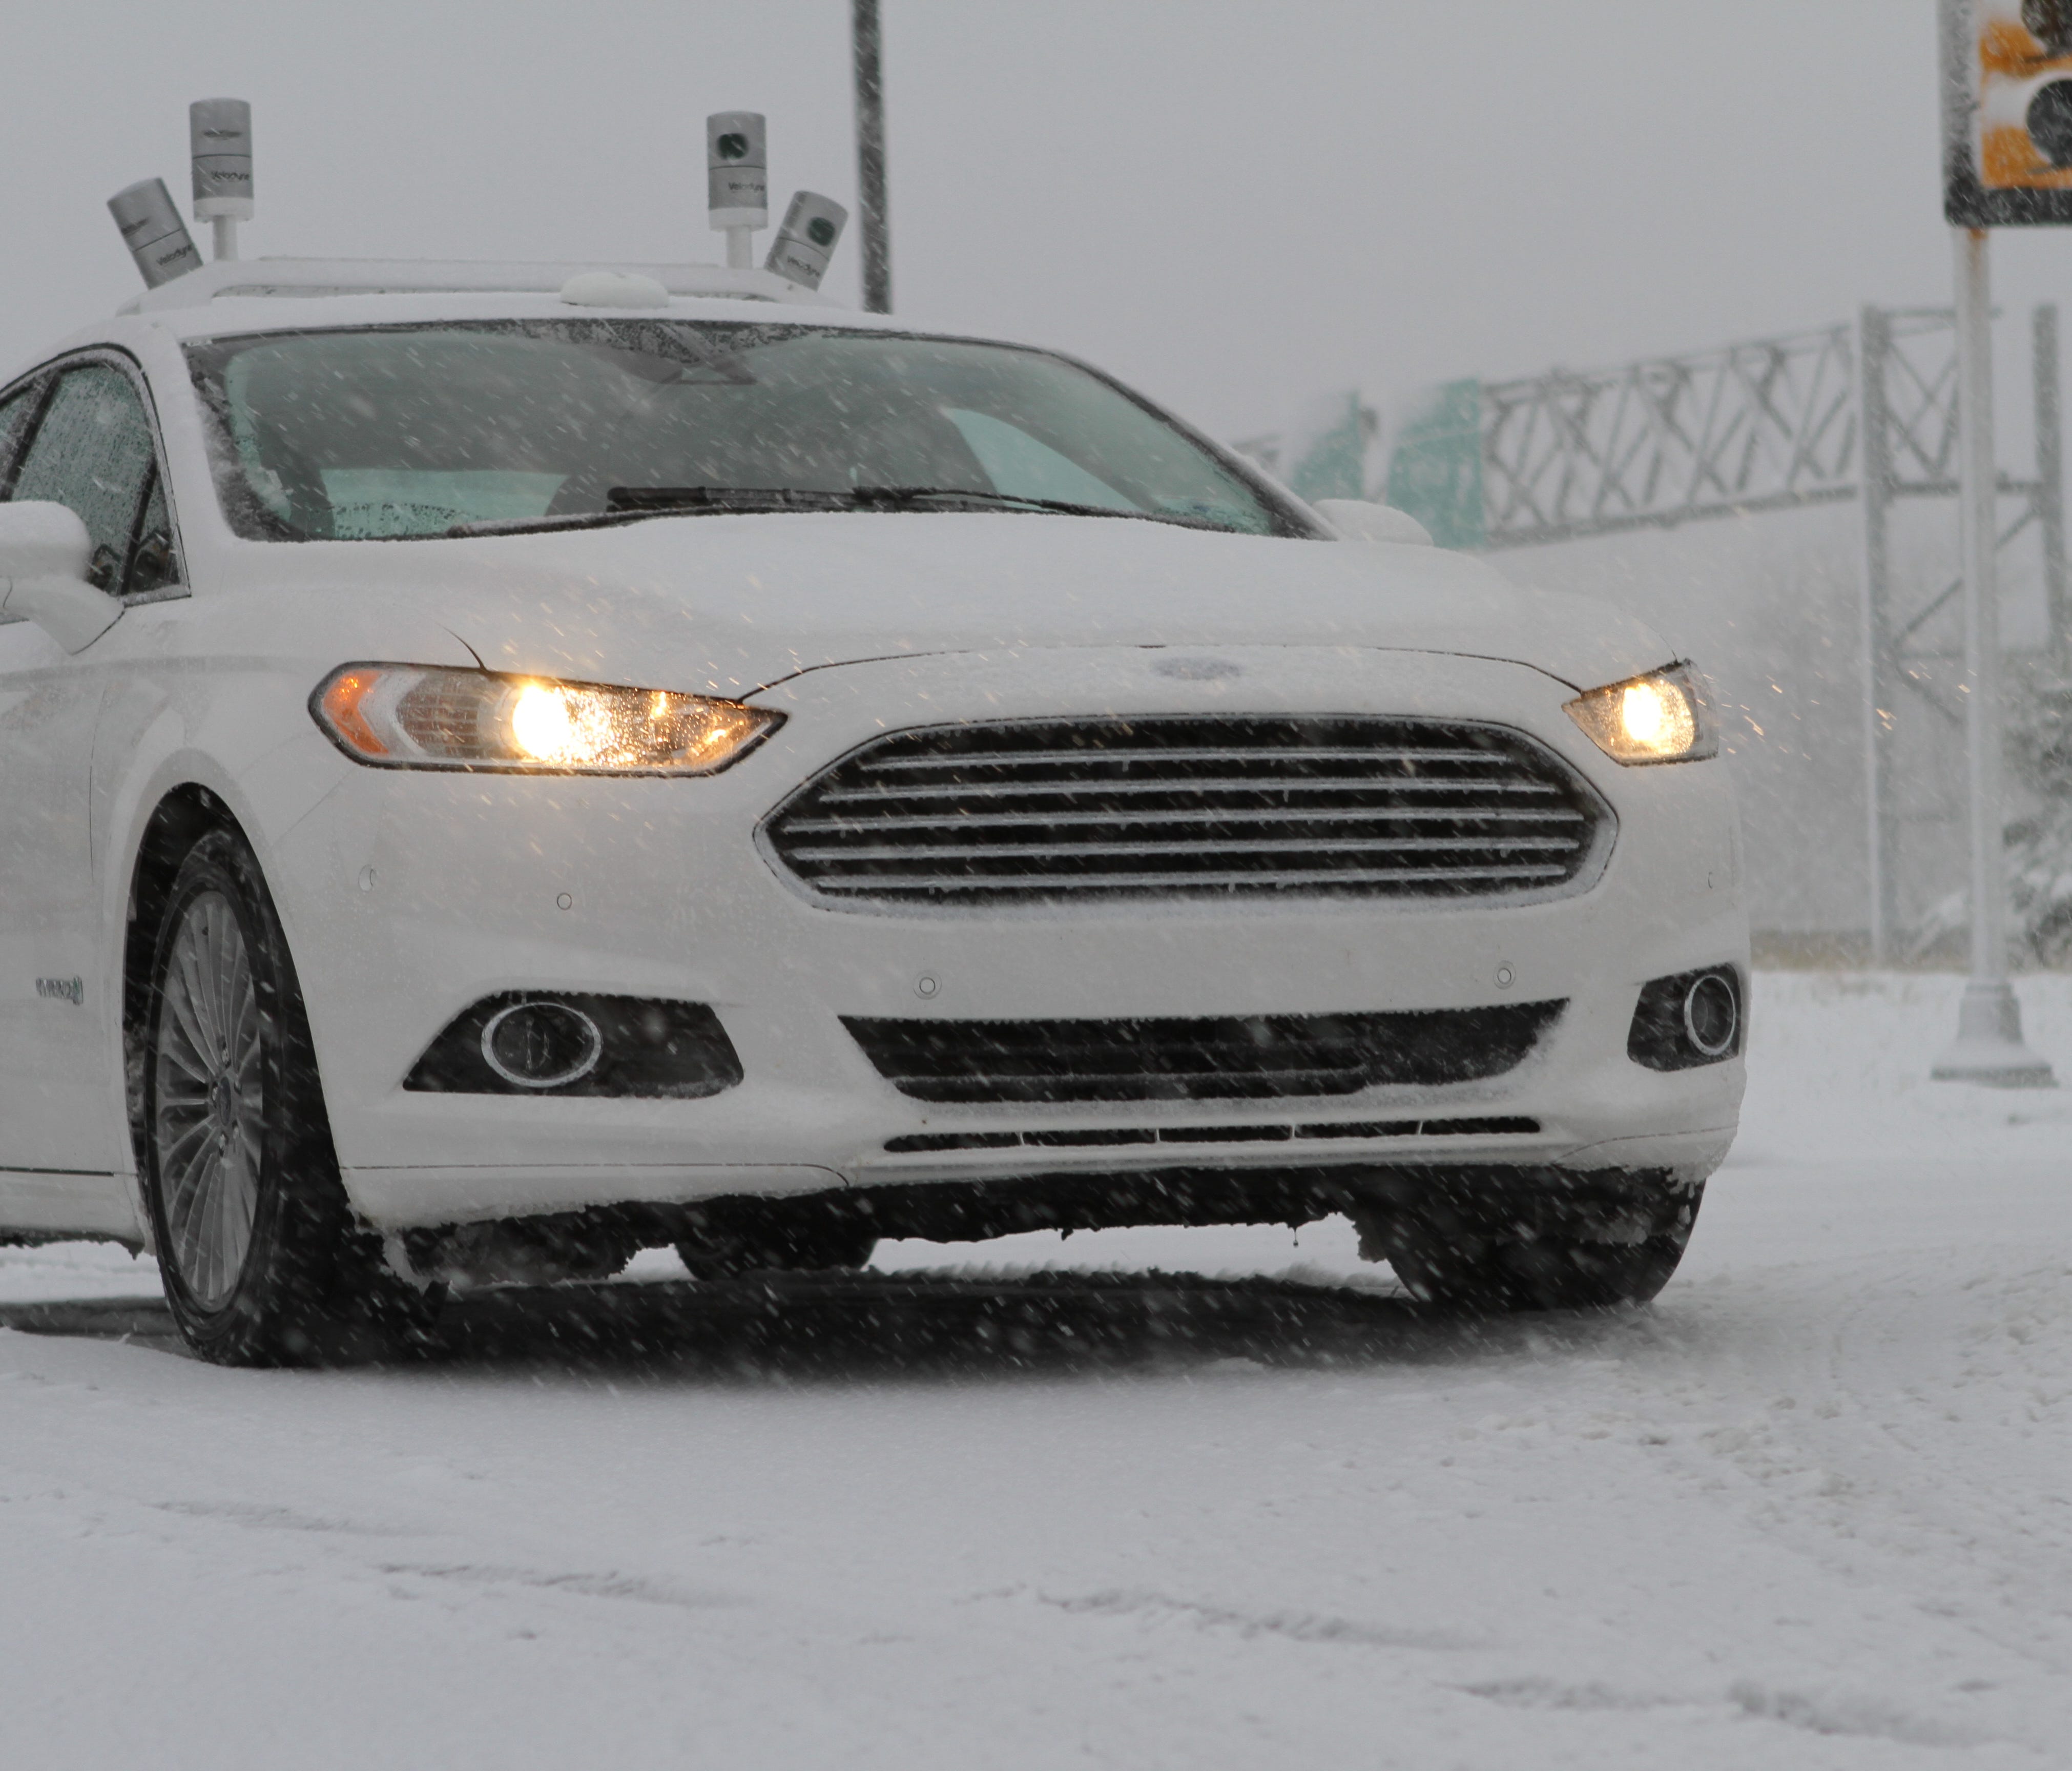 A Ford Fusion laden with self-driving sensors does some winter weather testing.